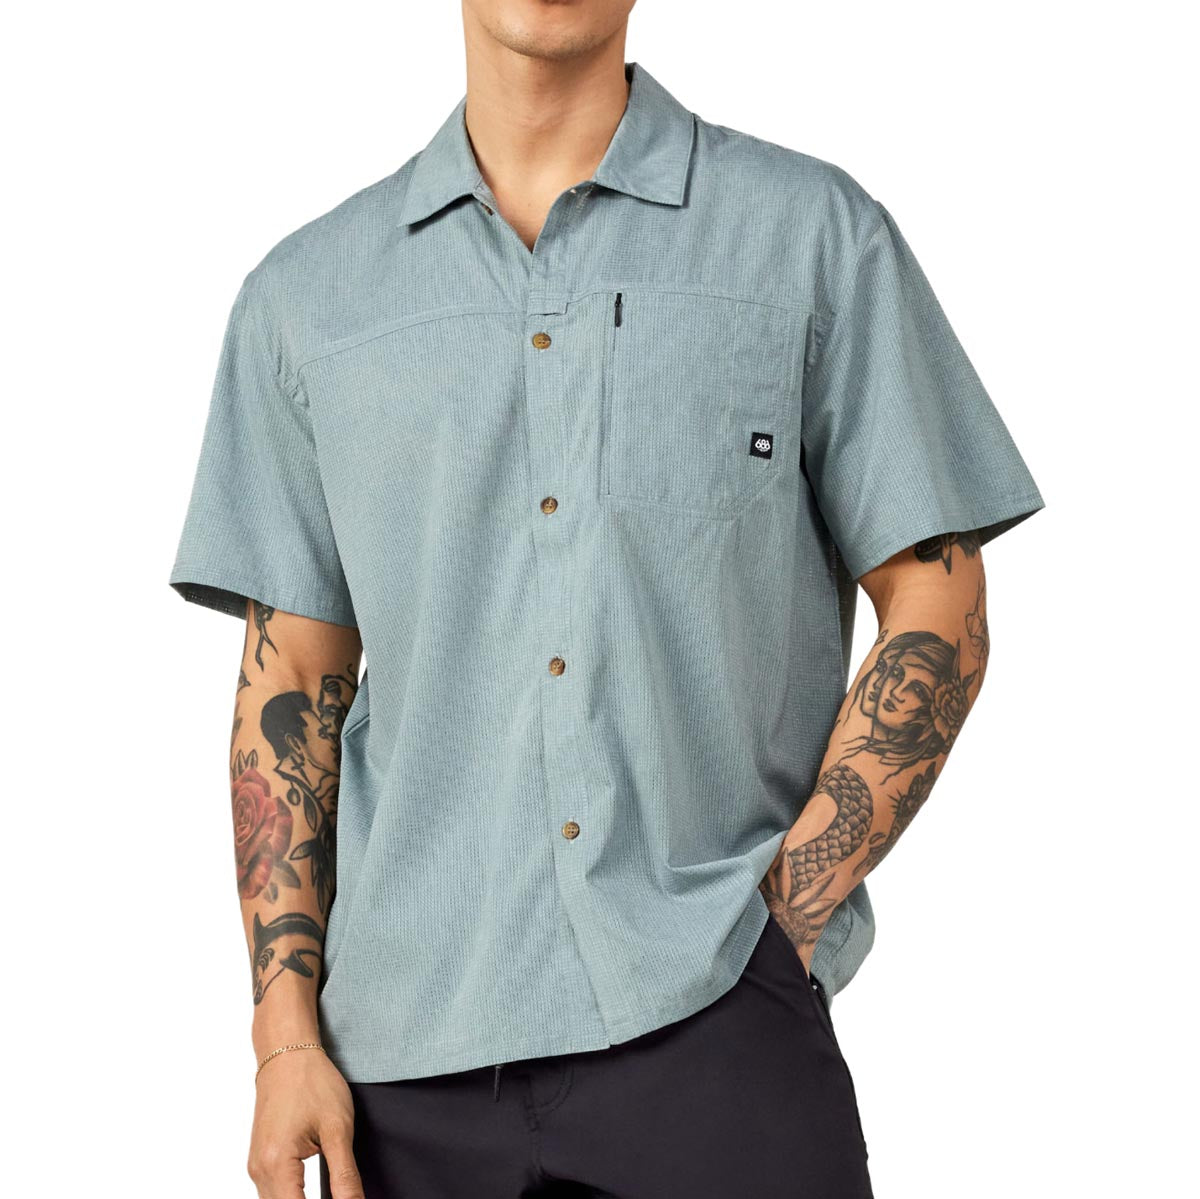 686 Canopy Woven Shirt - Heather Lead image 1